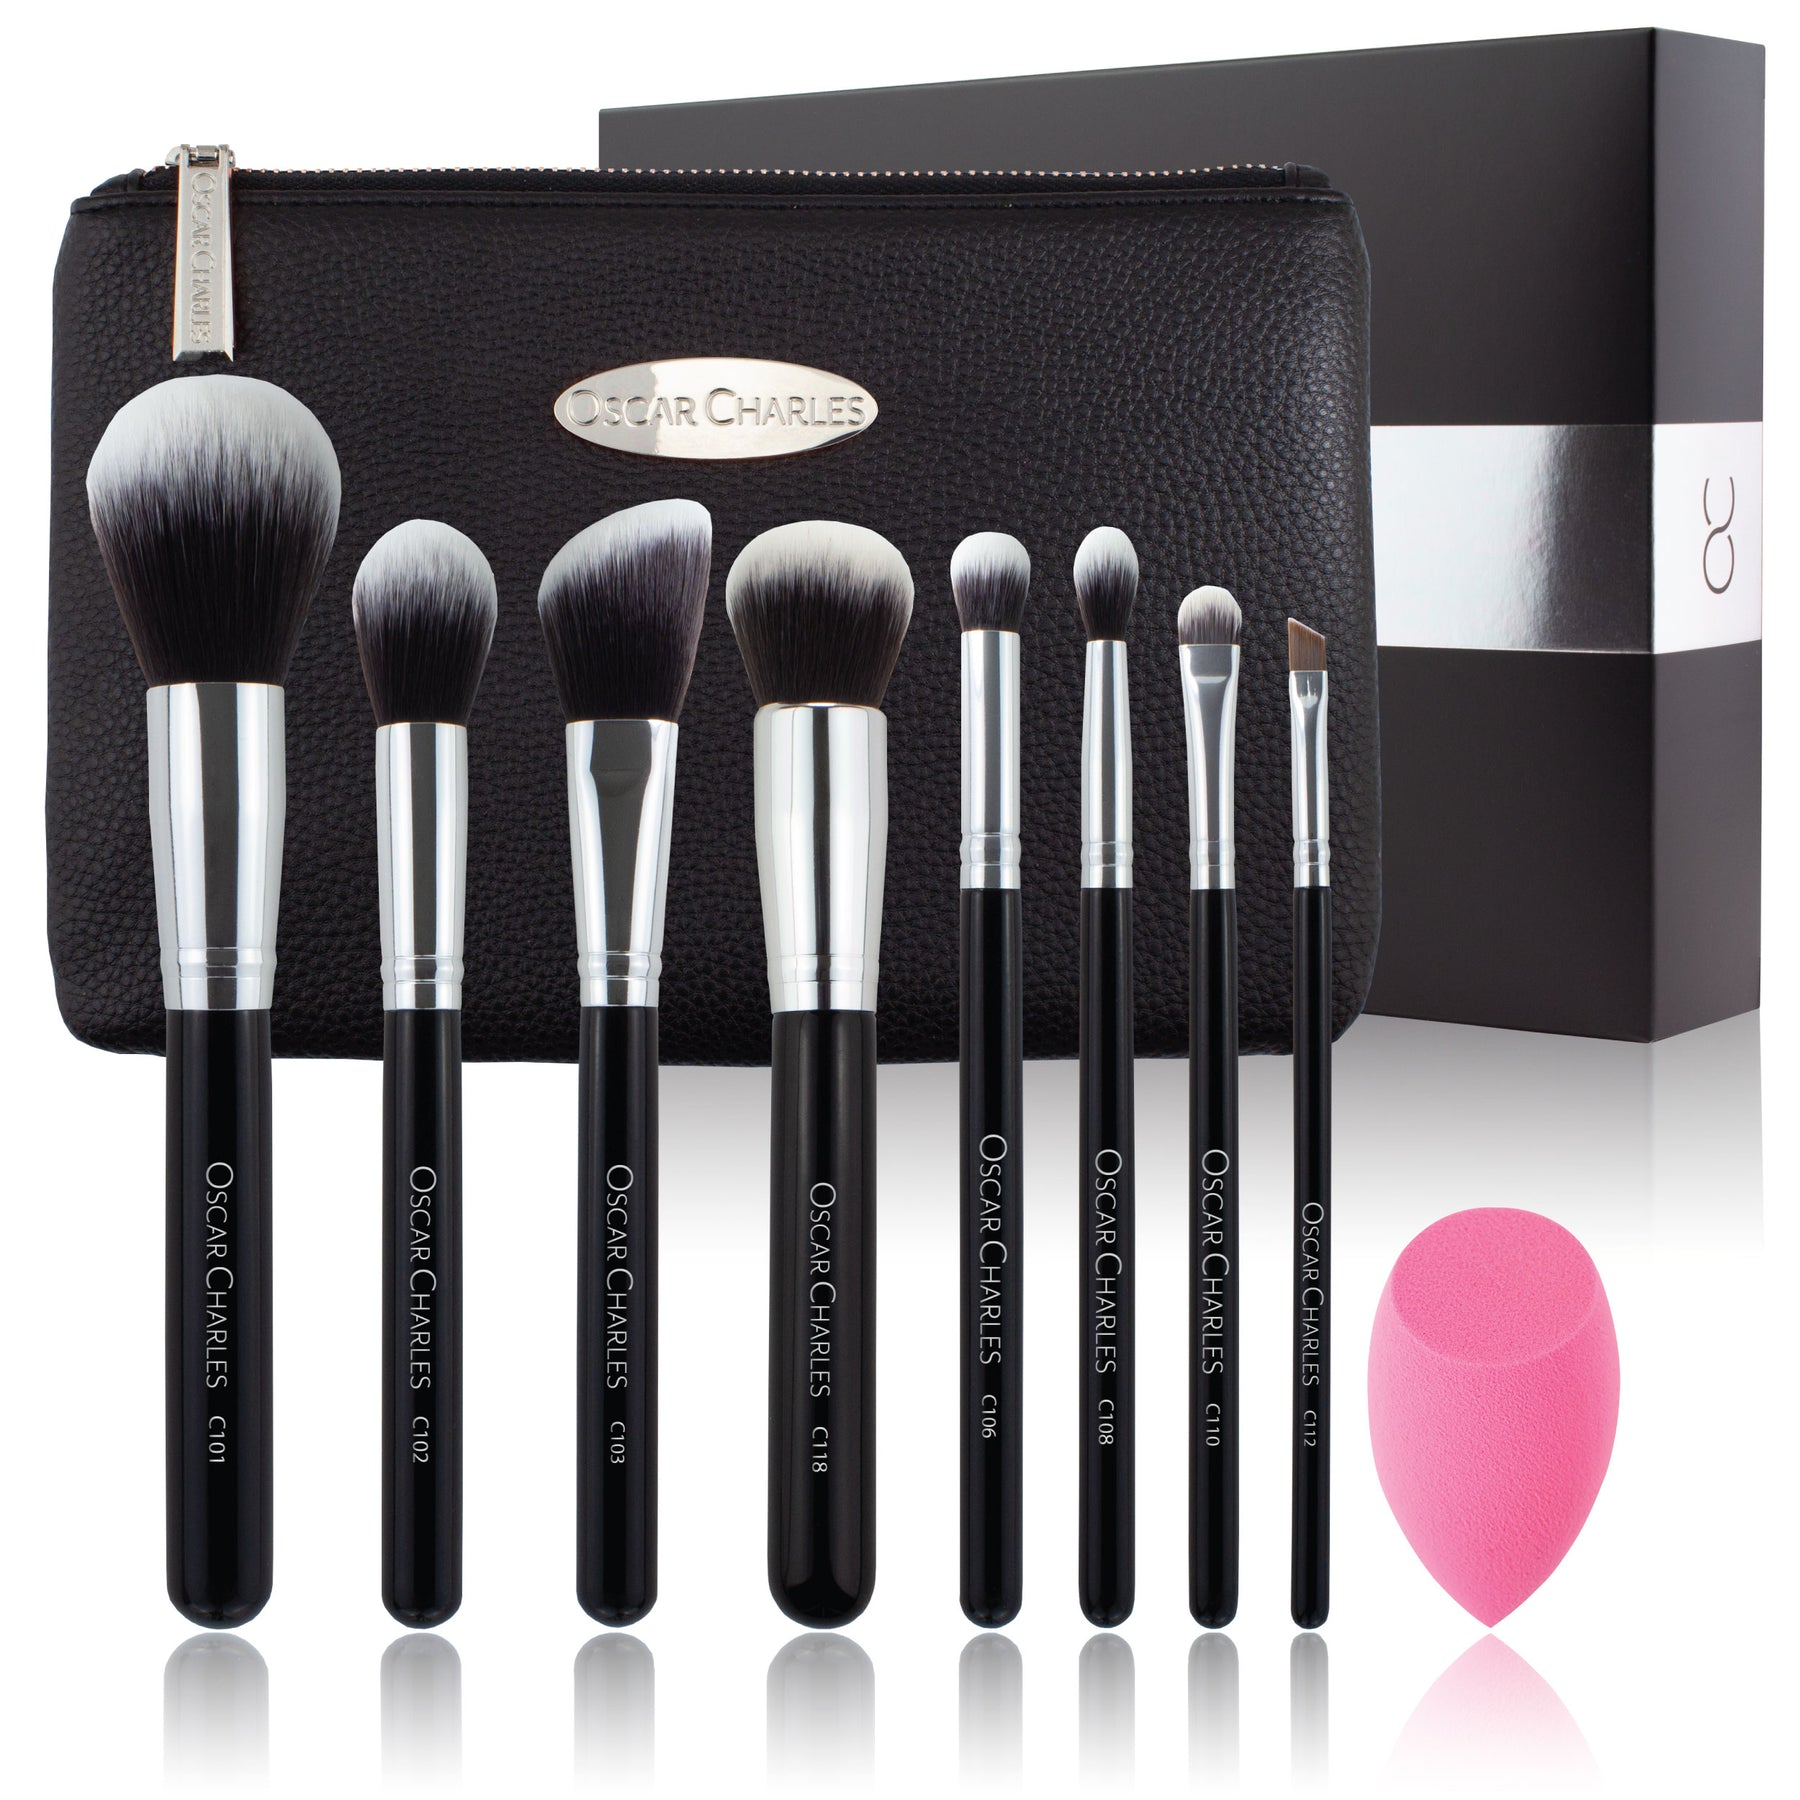 Oscar Charles 8 Piece Luxe Professional Makeup Brush Set & Luxury Cosm